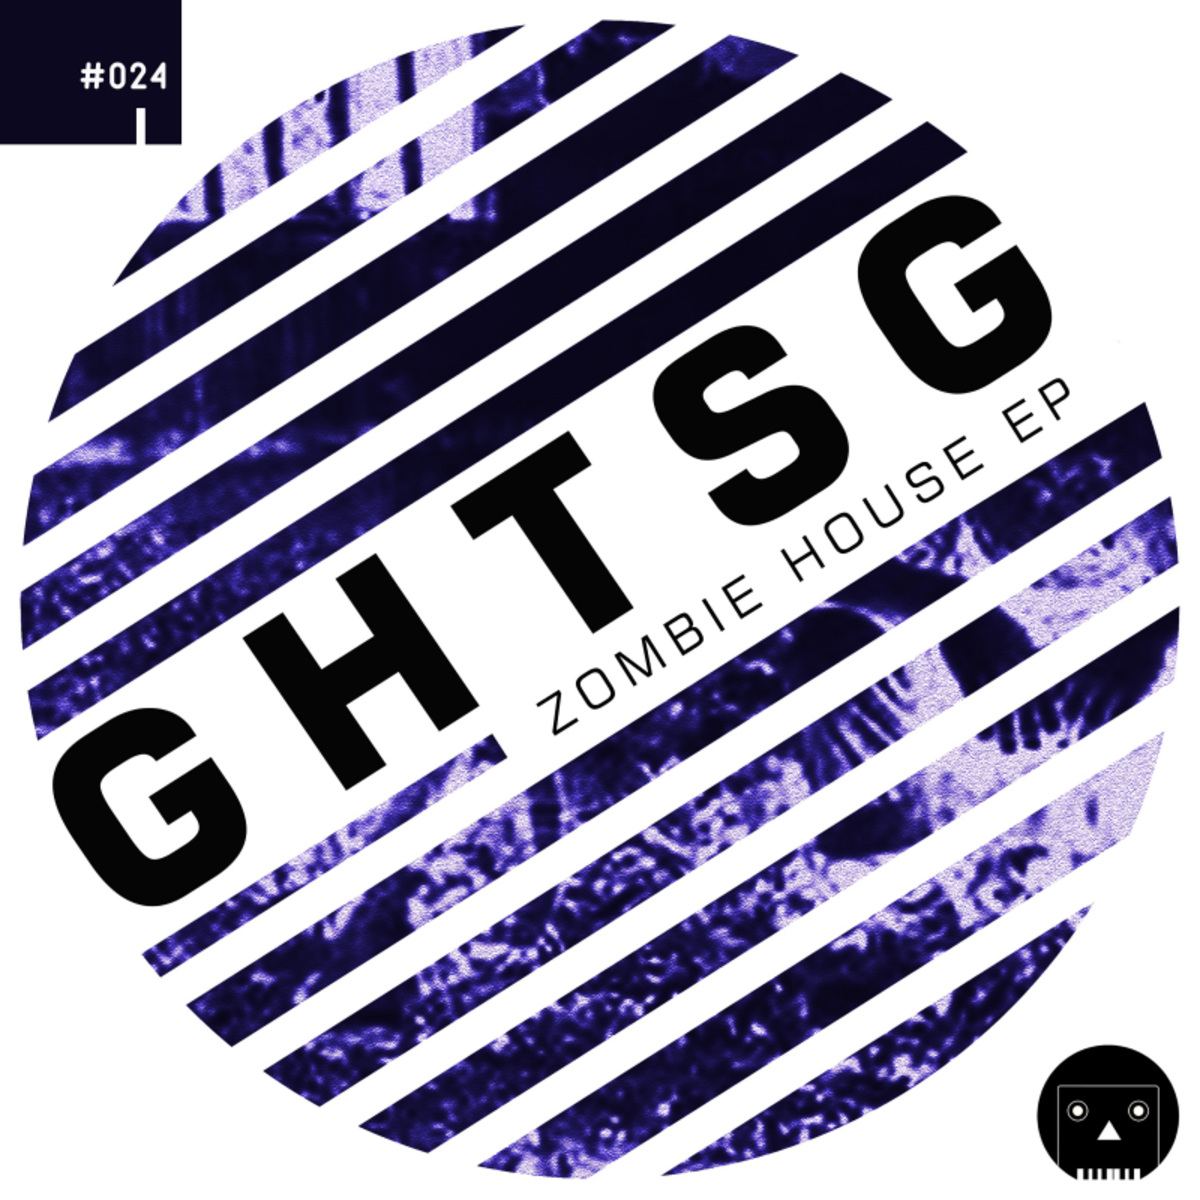 GHTSG - Zombie House EP / Afro Native Records